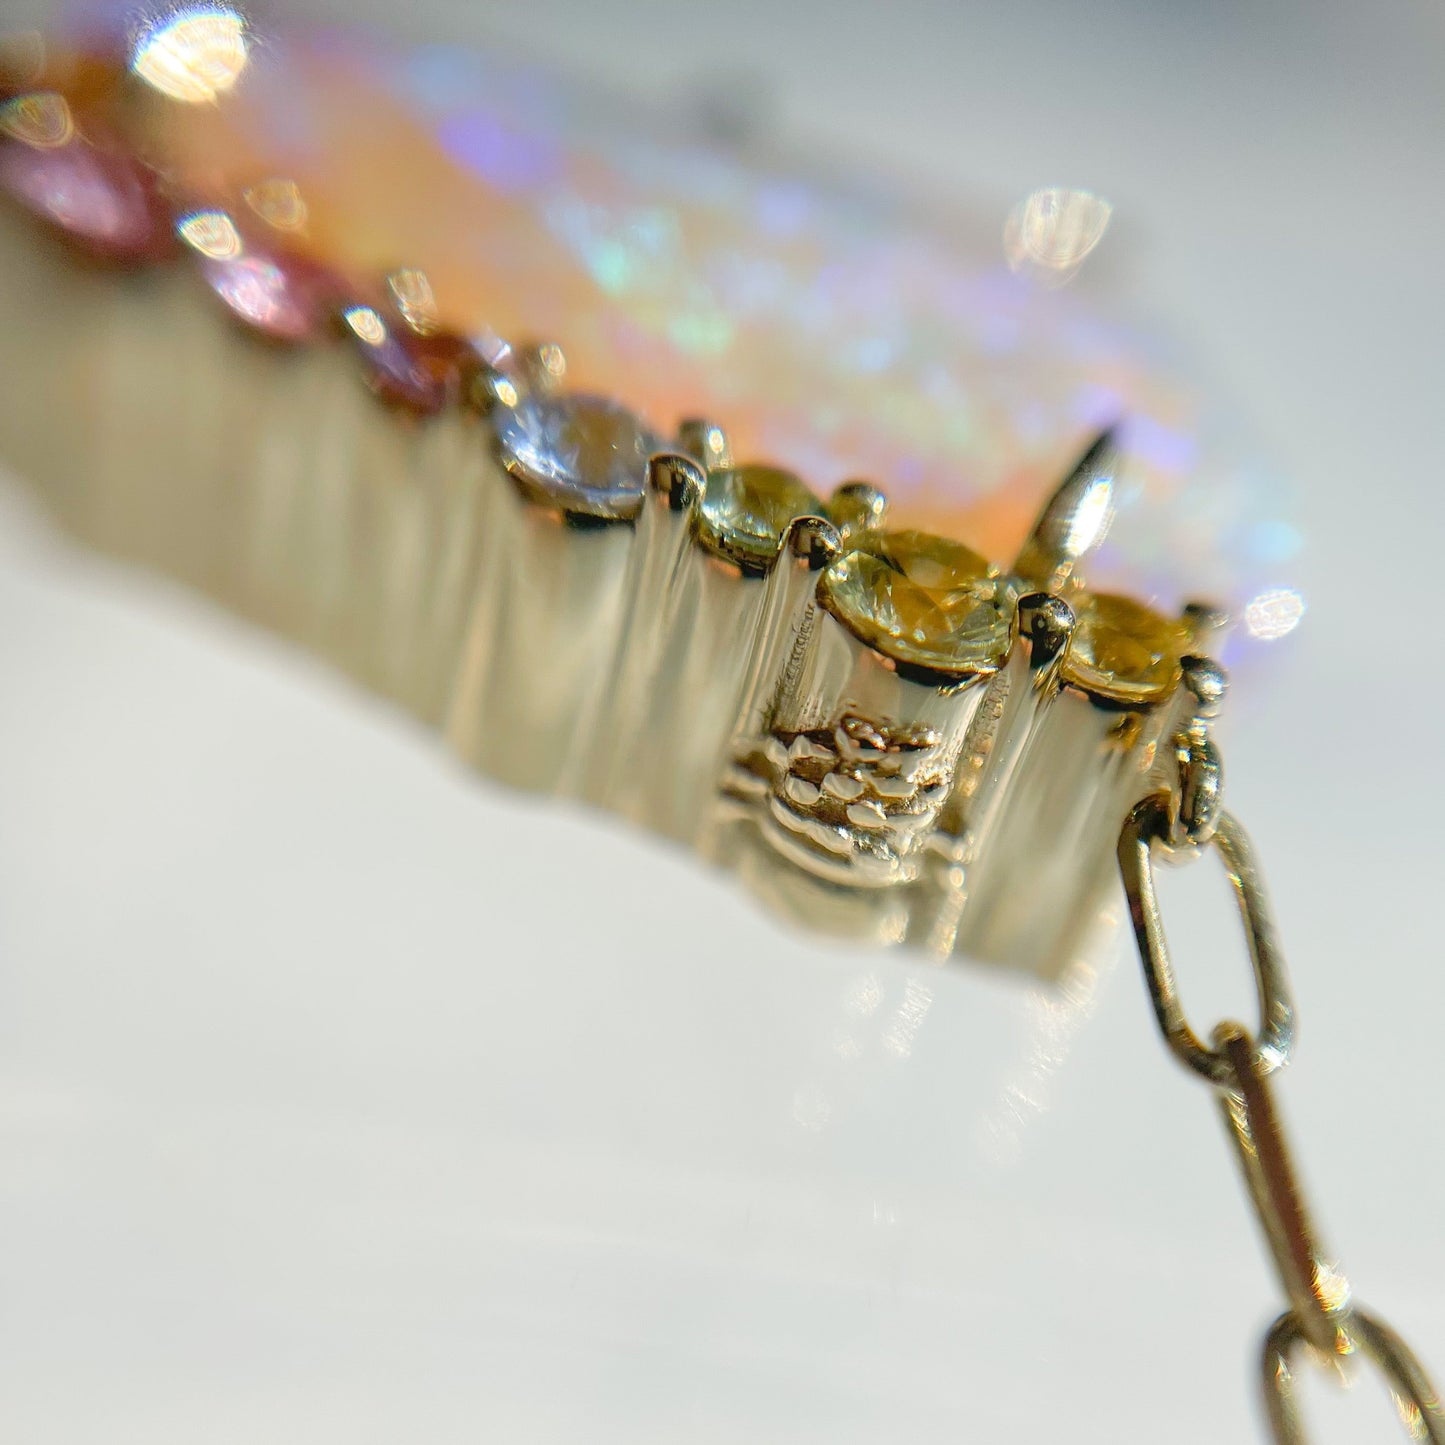 An Australian Opal Necklace by NIXIN Jewelry with a hidden detail on the back of the pendant. A close up shot of the gold opal necklace detail.